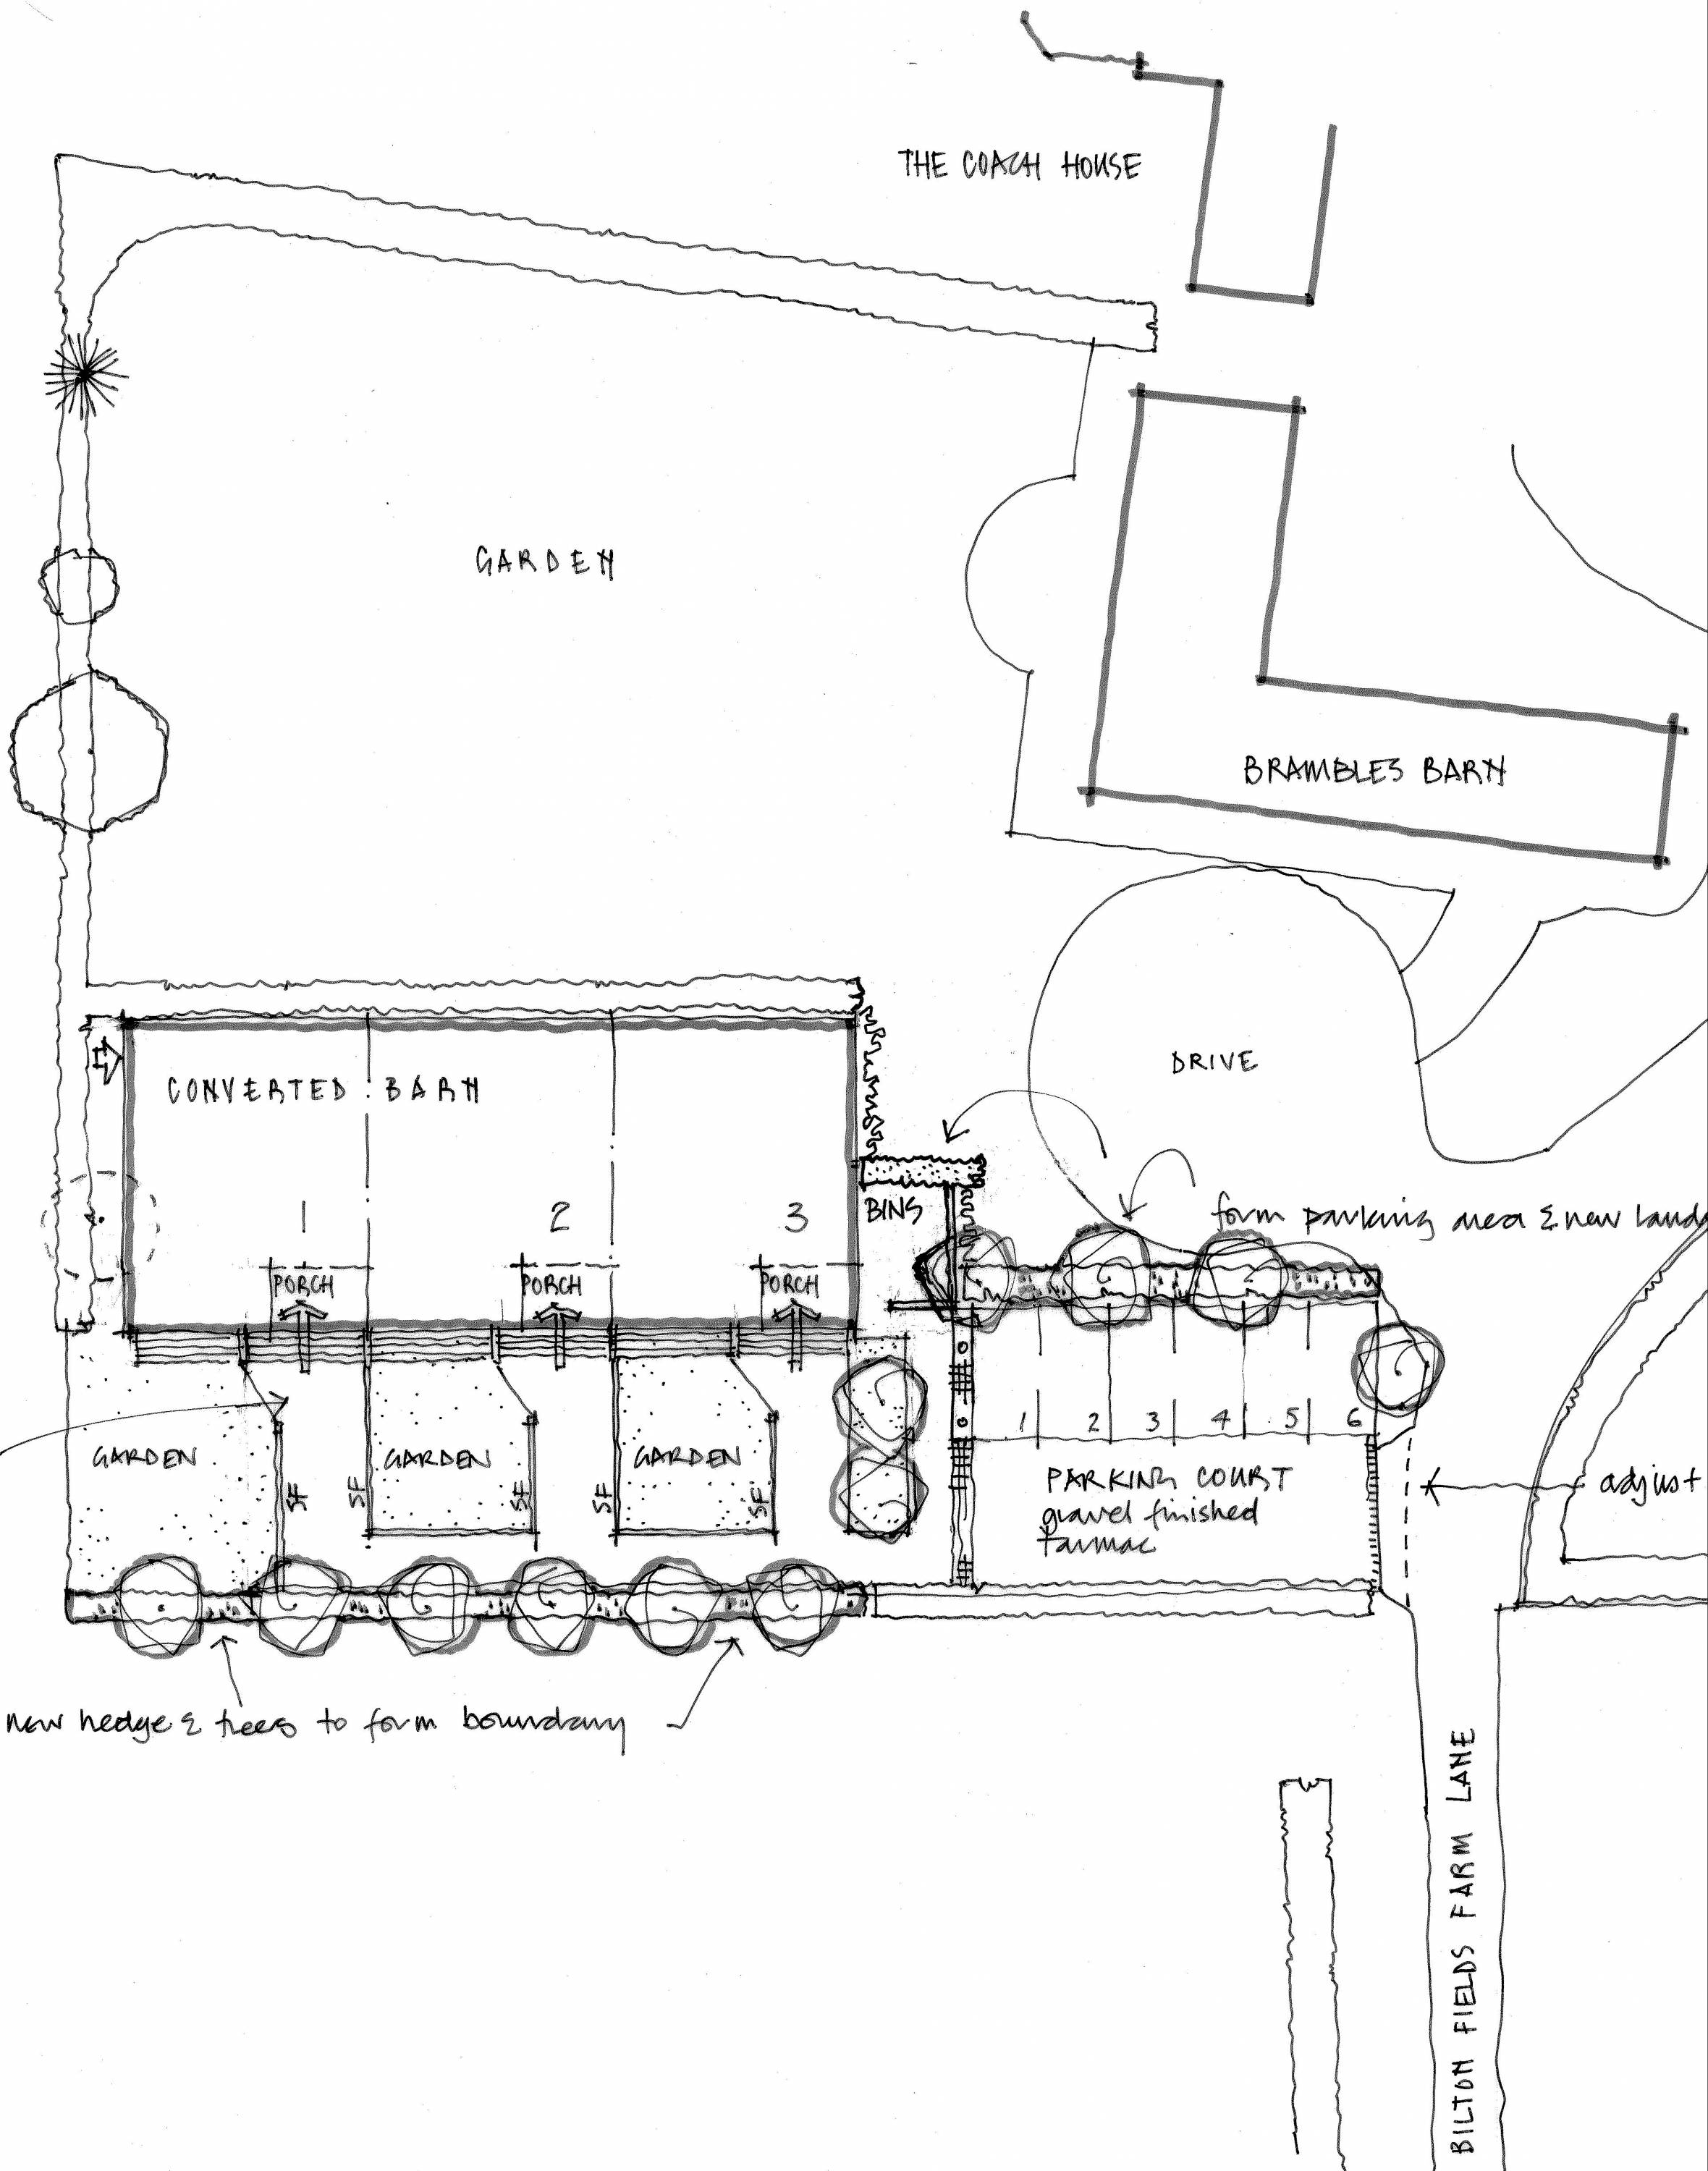 The Shed site plan